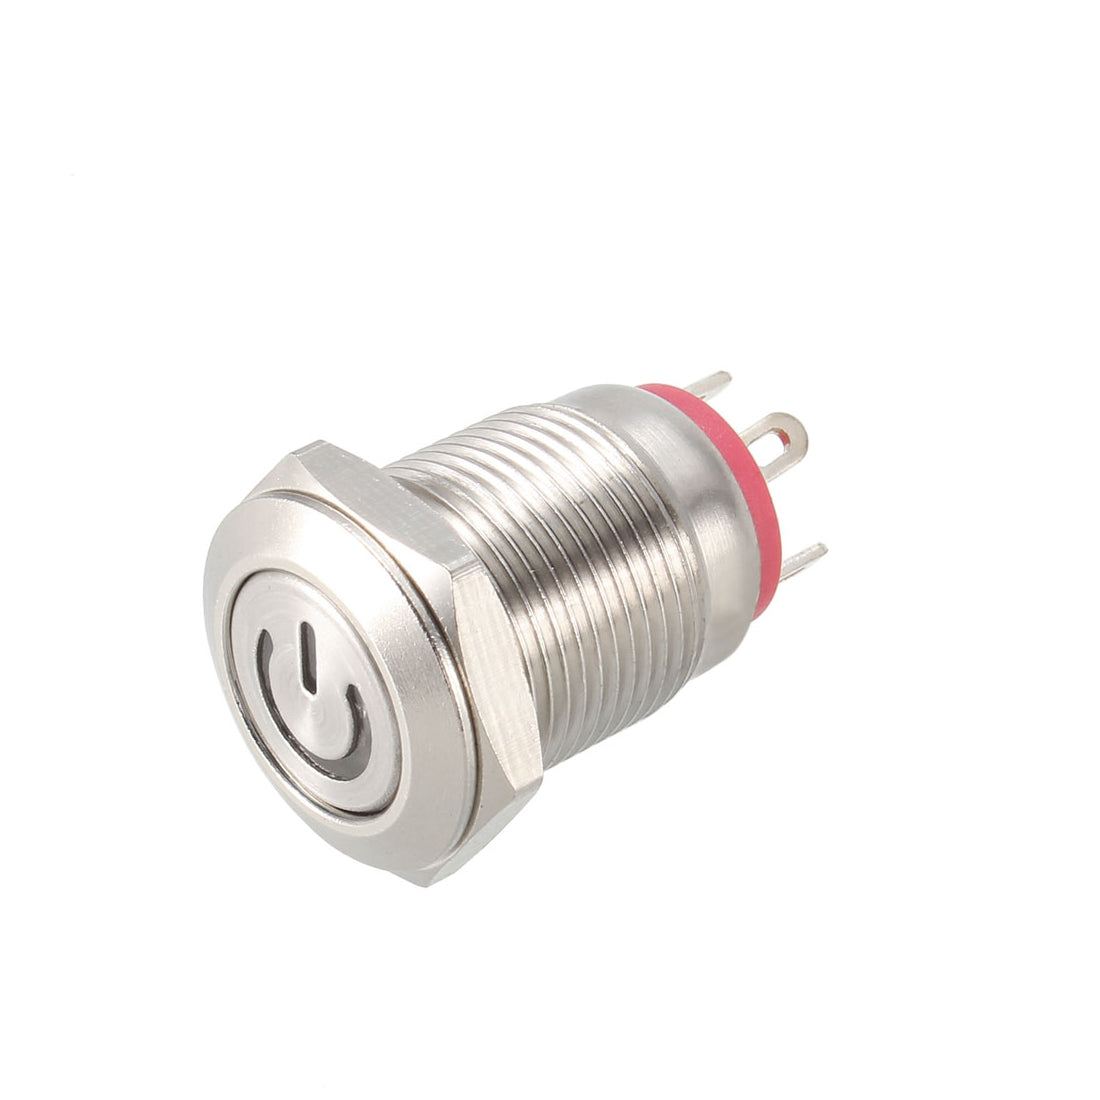 uxcell Uxcell Momentary Metal Push Button Switch Flat Head 12mm Mounting Dia 1NO 3-6V LED Light